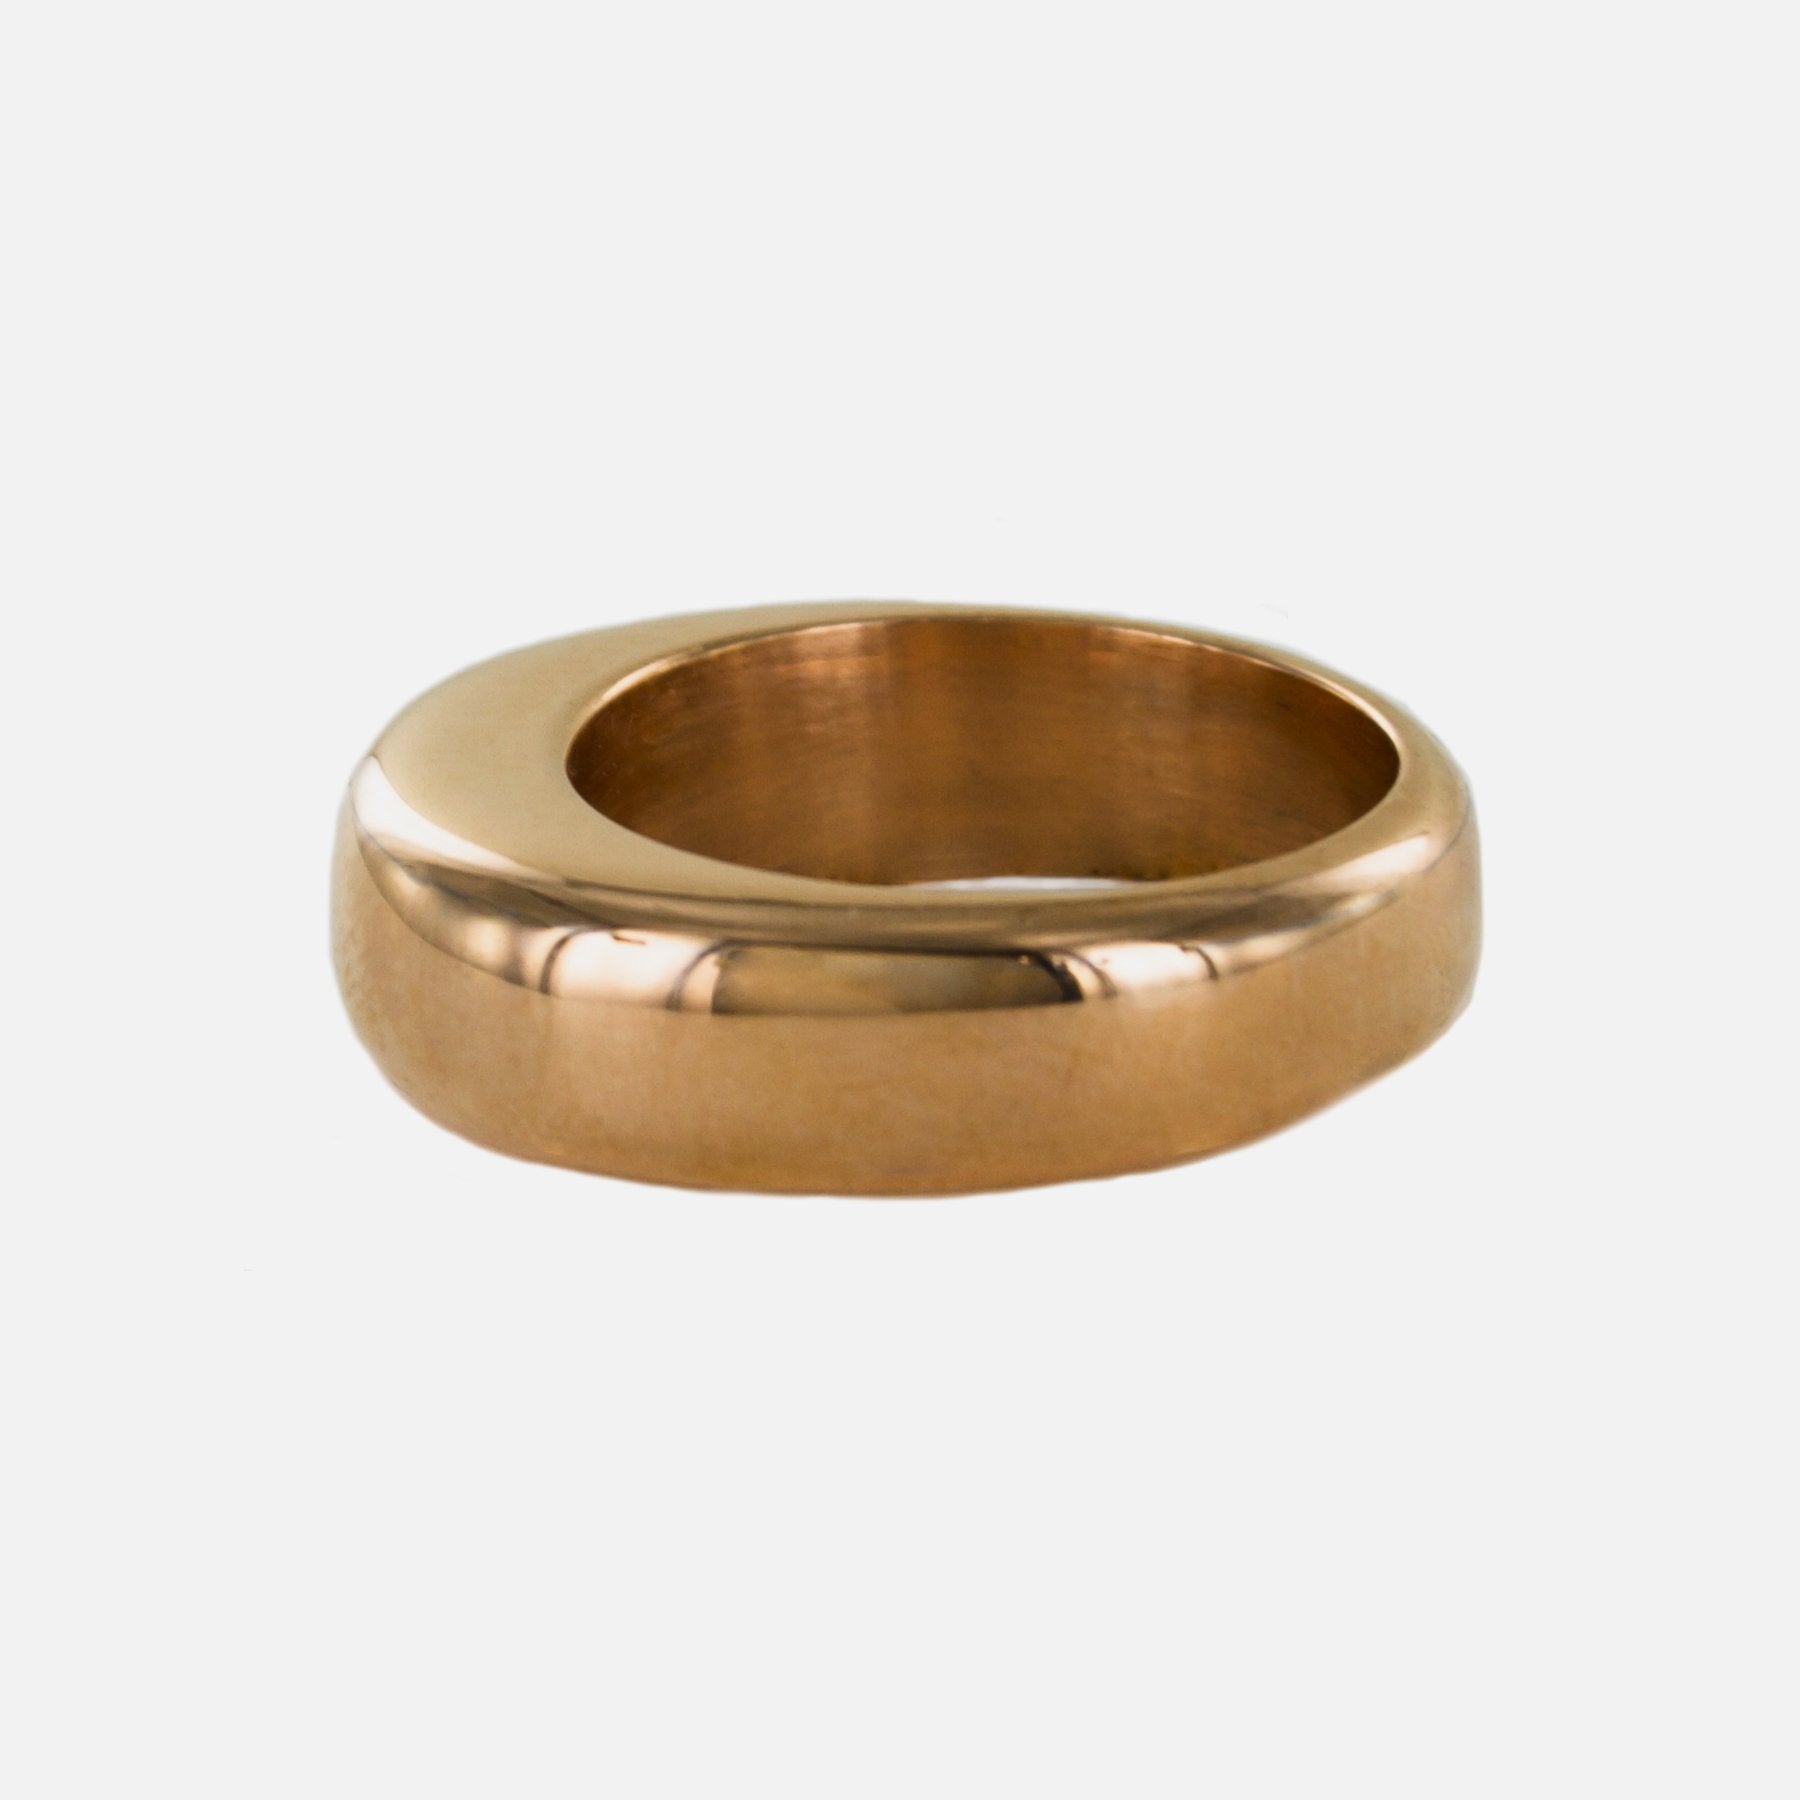 Hollow Copper Ring - 7